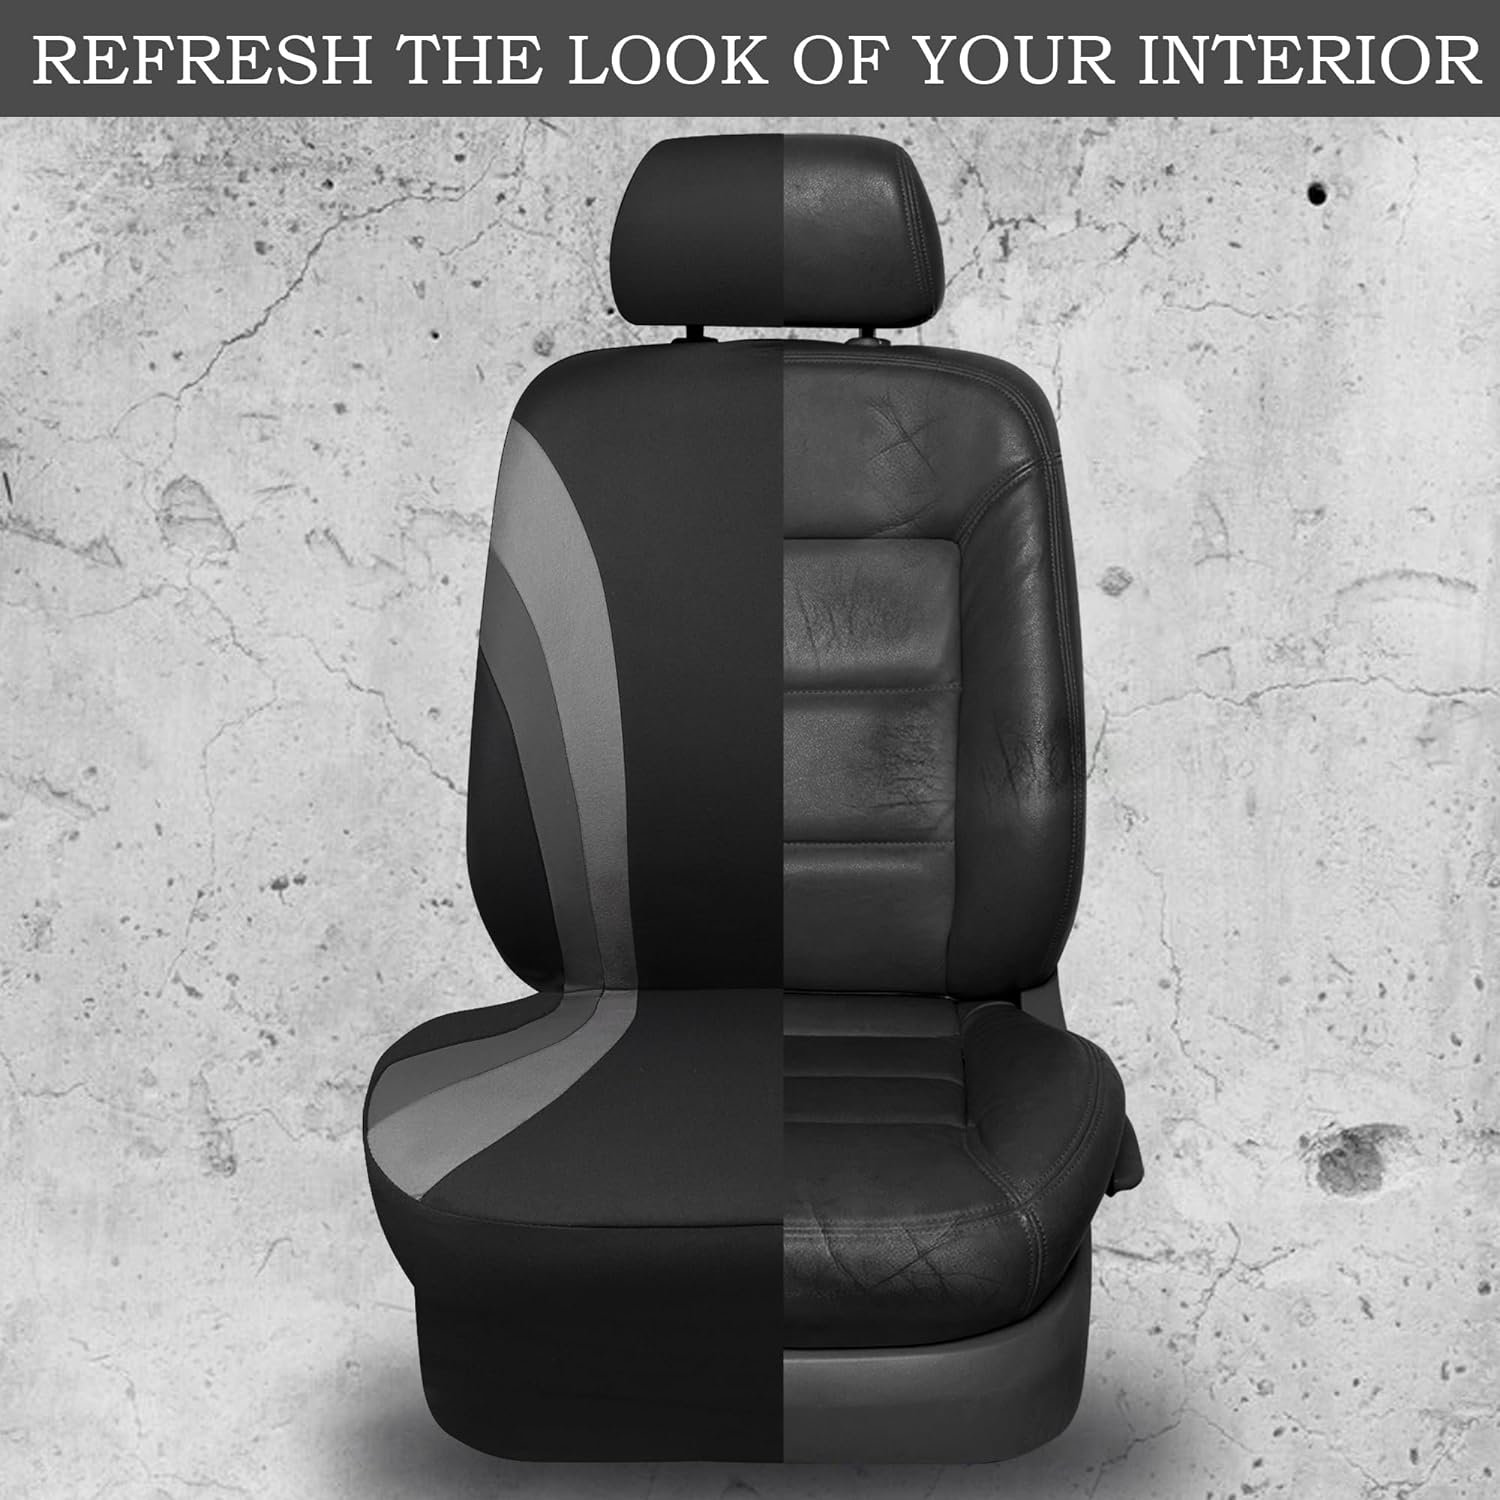 CAR PASS Line Rider Sporty Front Seat Covers, Blue Car Seat Covers Two Front Seats Only, Airbag Compatible,Universal Fit Sedans,Cars,Vans,SUV,Truck(Black and Blue)